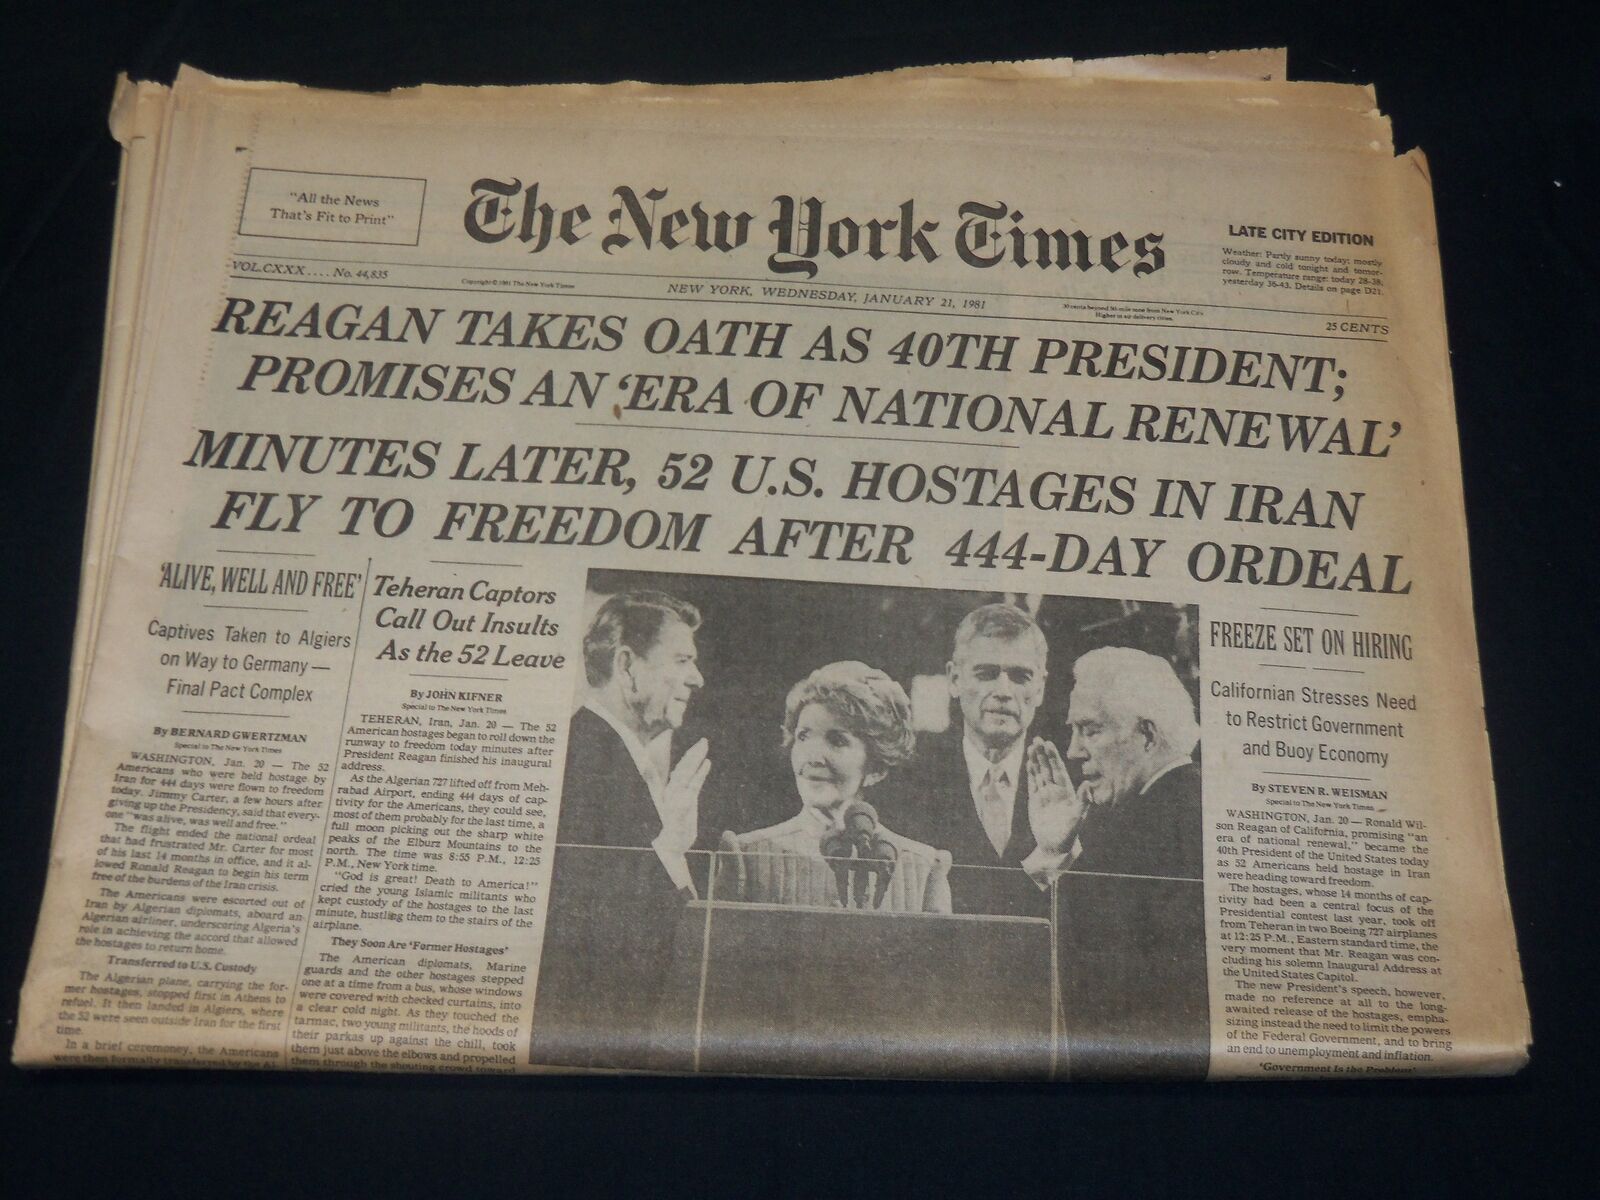 1981 JANUARY 21 NEW YORK TIMES - REAGAN TAKES OATH AS PRESIDENT - NP 4908